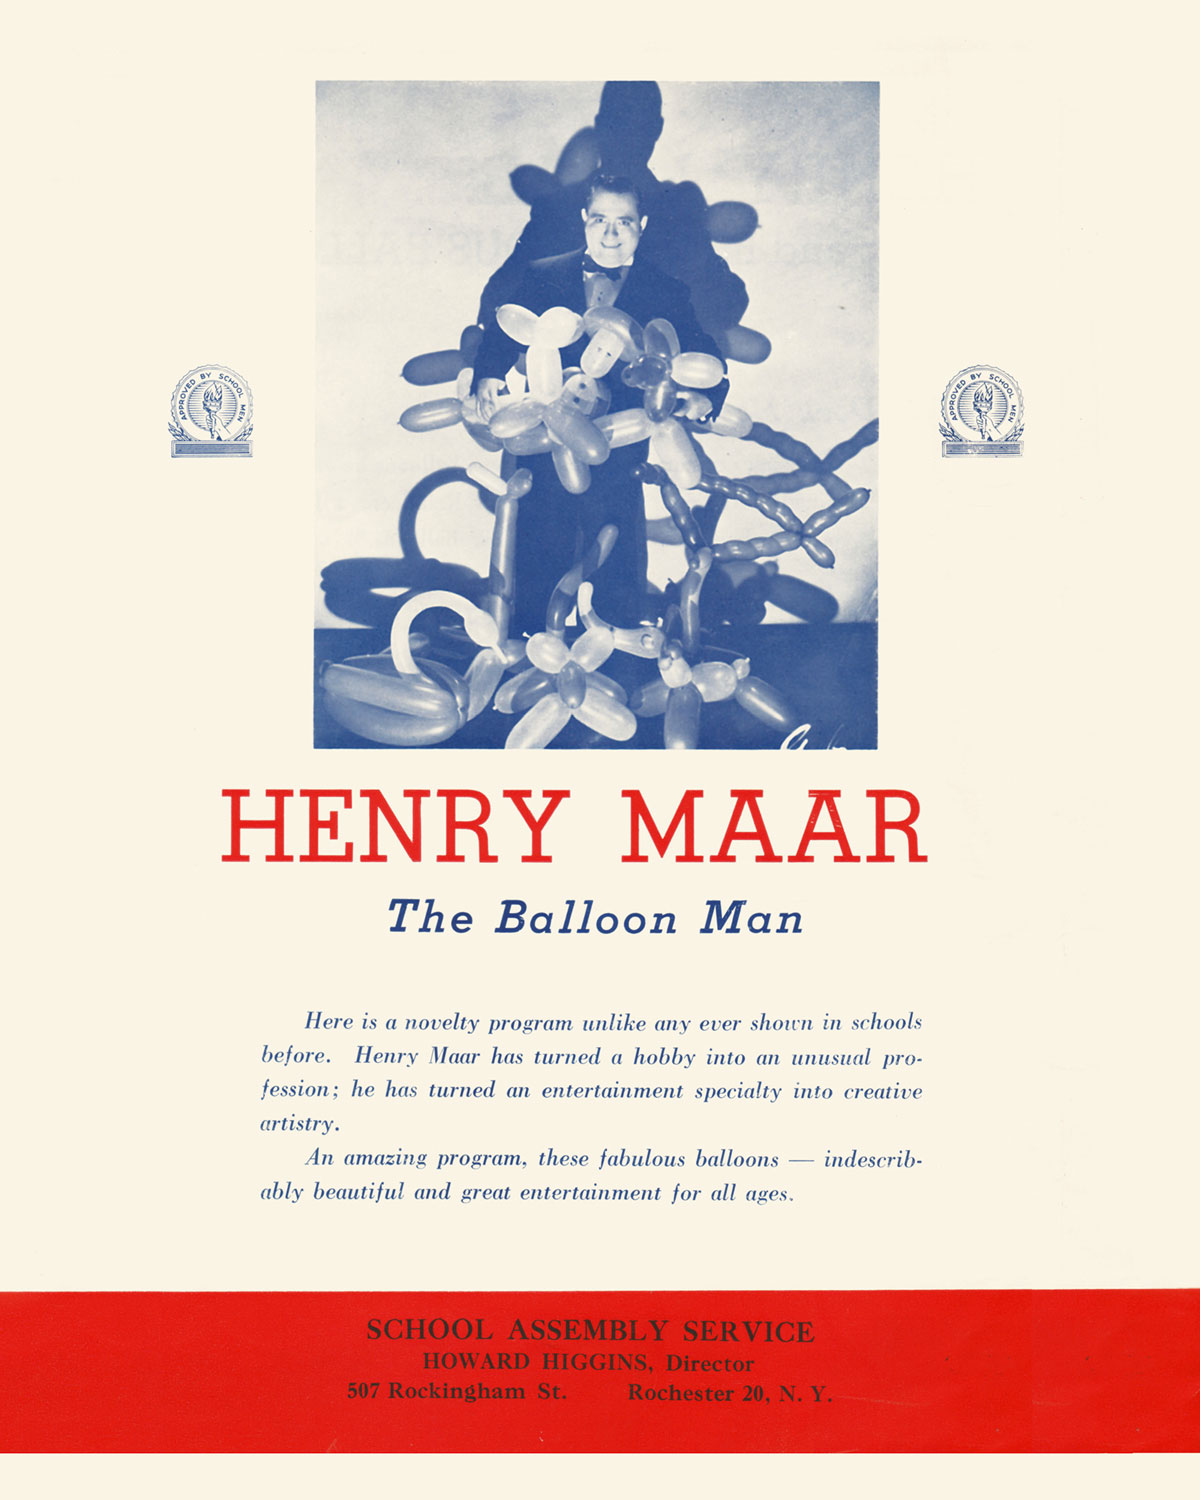 A publicity brochure from the late nineteen forties for Henry Maar, otherwise known as “The Balloon Man.”